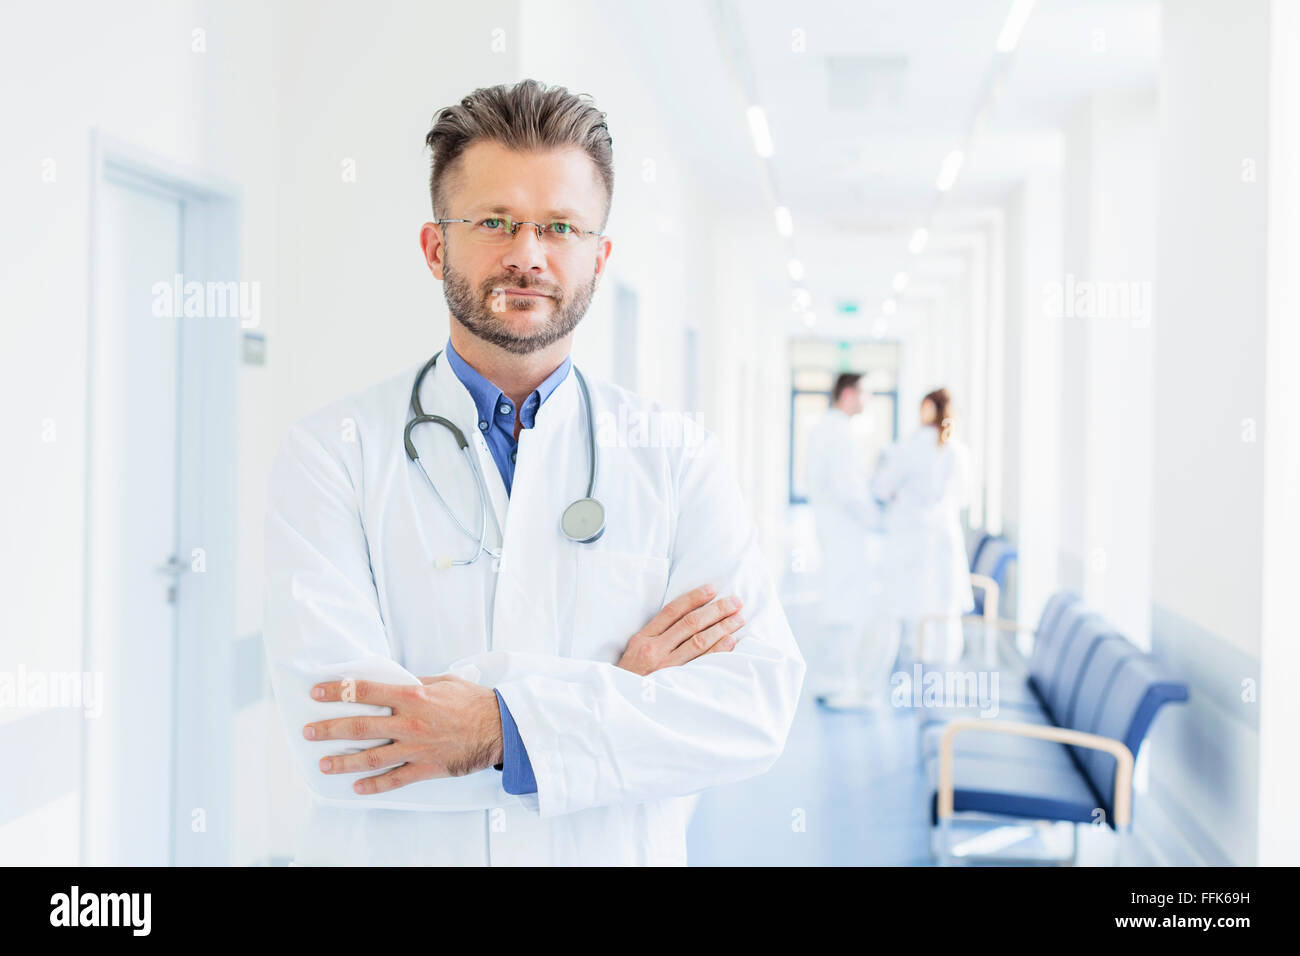 Portrait of doctor with arms crossed in hospital corridor Stock Photo